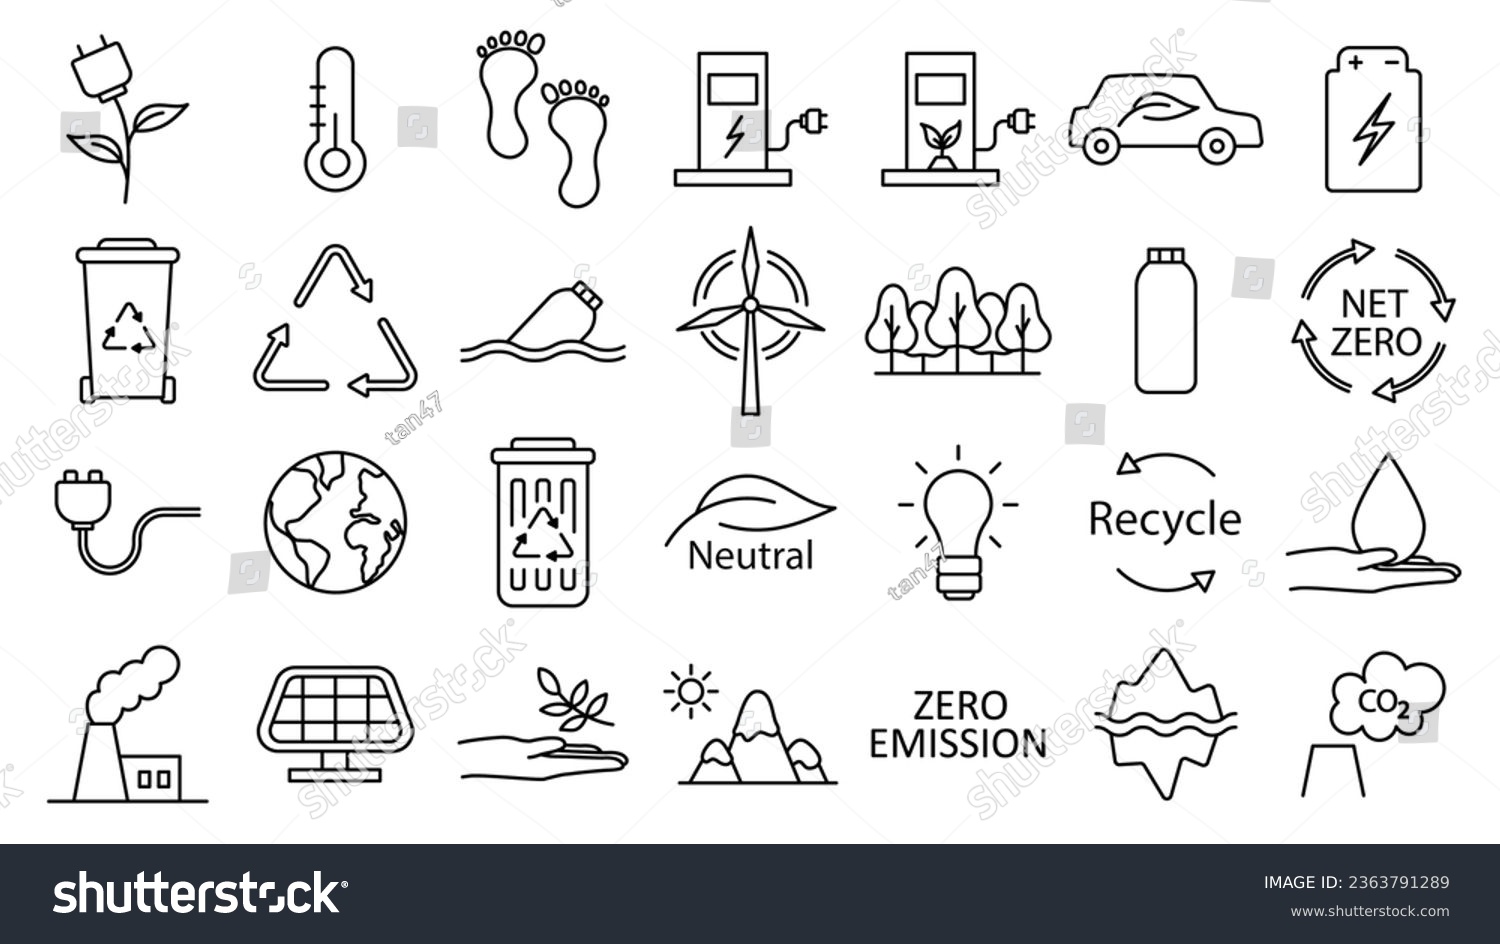 SVG of Icon collection with zero emission symbol concept. greenhouse gas carbon credit design set. protect ecological green vector outline. carbon net zero neutral natural. carbon footprint art pictogram. svg